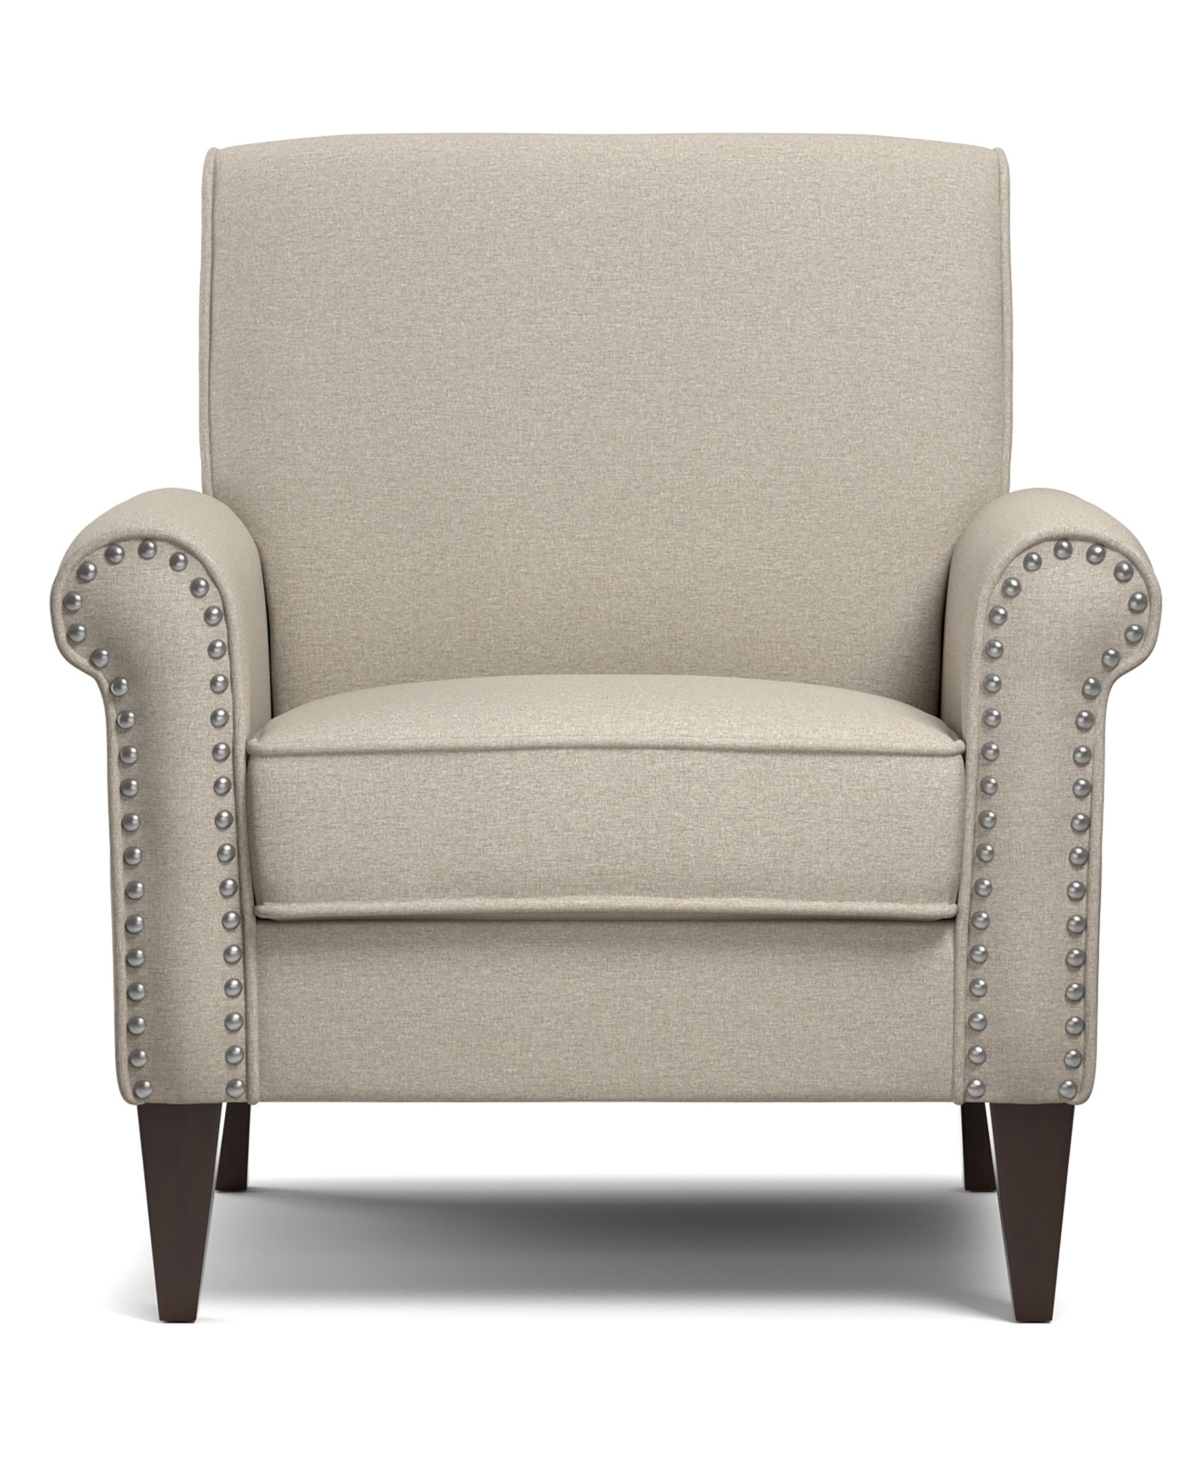 UPC 843201100021 product image for Janet Linen Arm Chair | upcitemdb.com